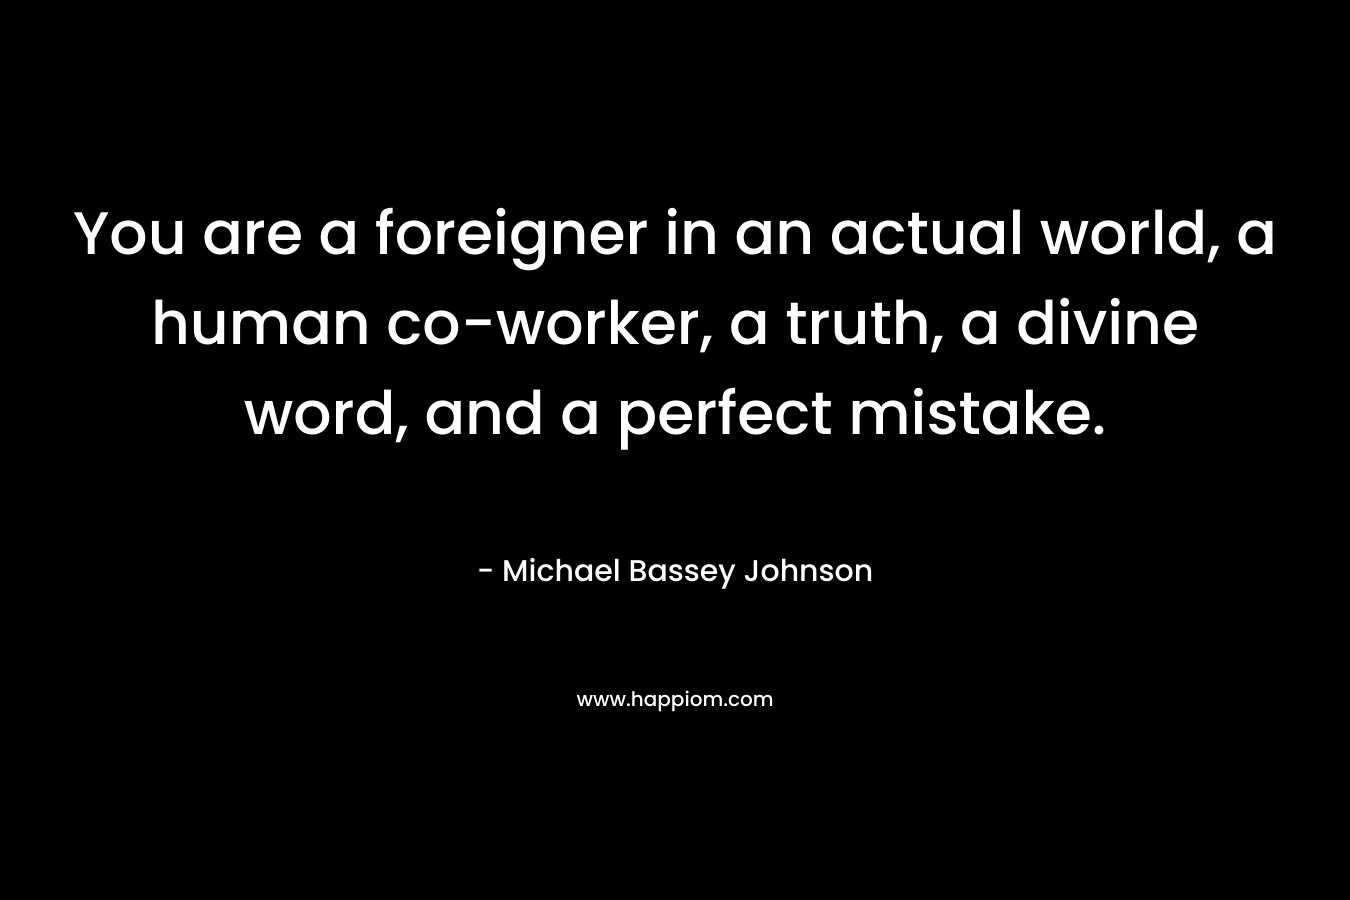 You are a foreigner in an actual world, a human co-worker, a truth, a divine word, and a perfect mistake. – Michael Bassey Johnson